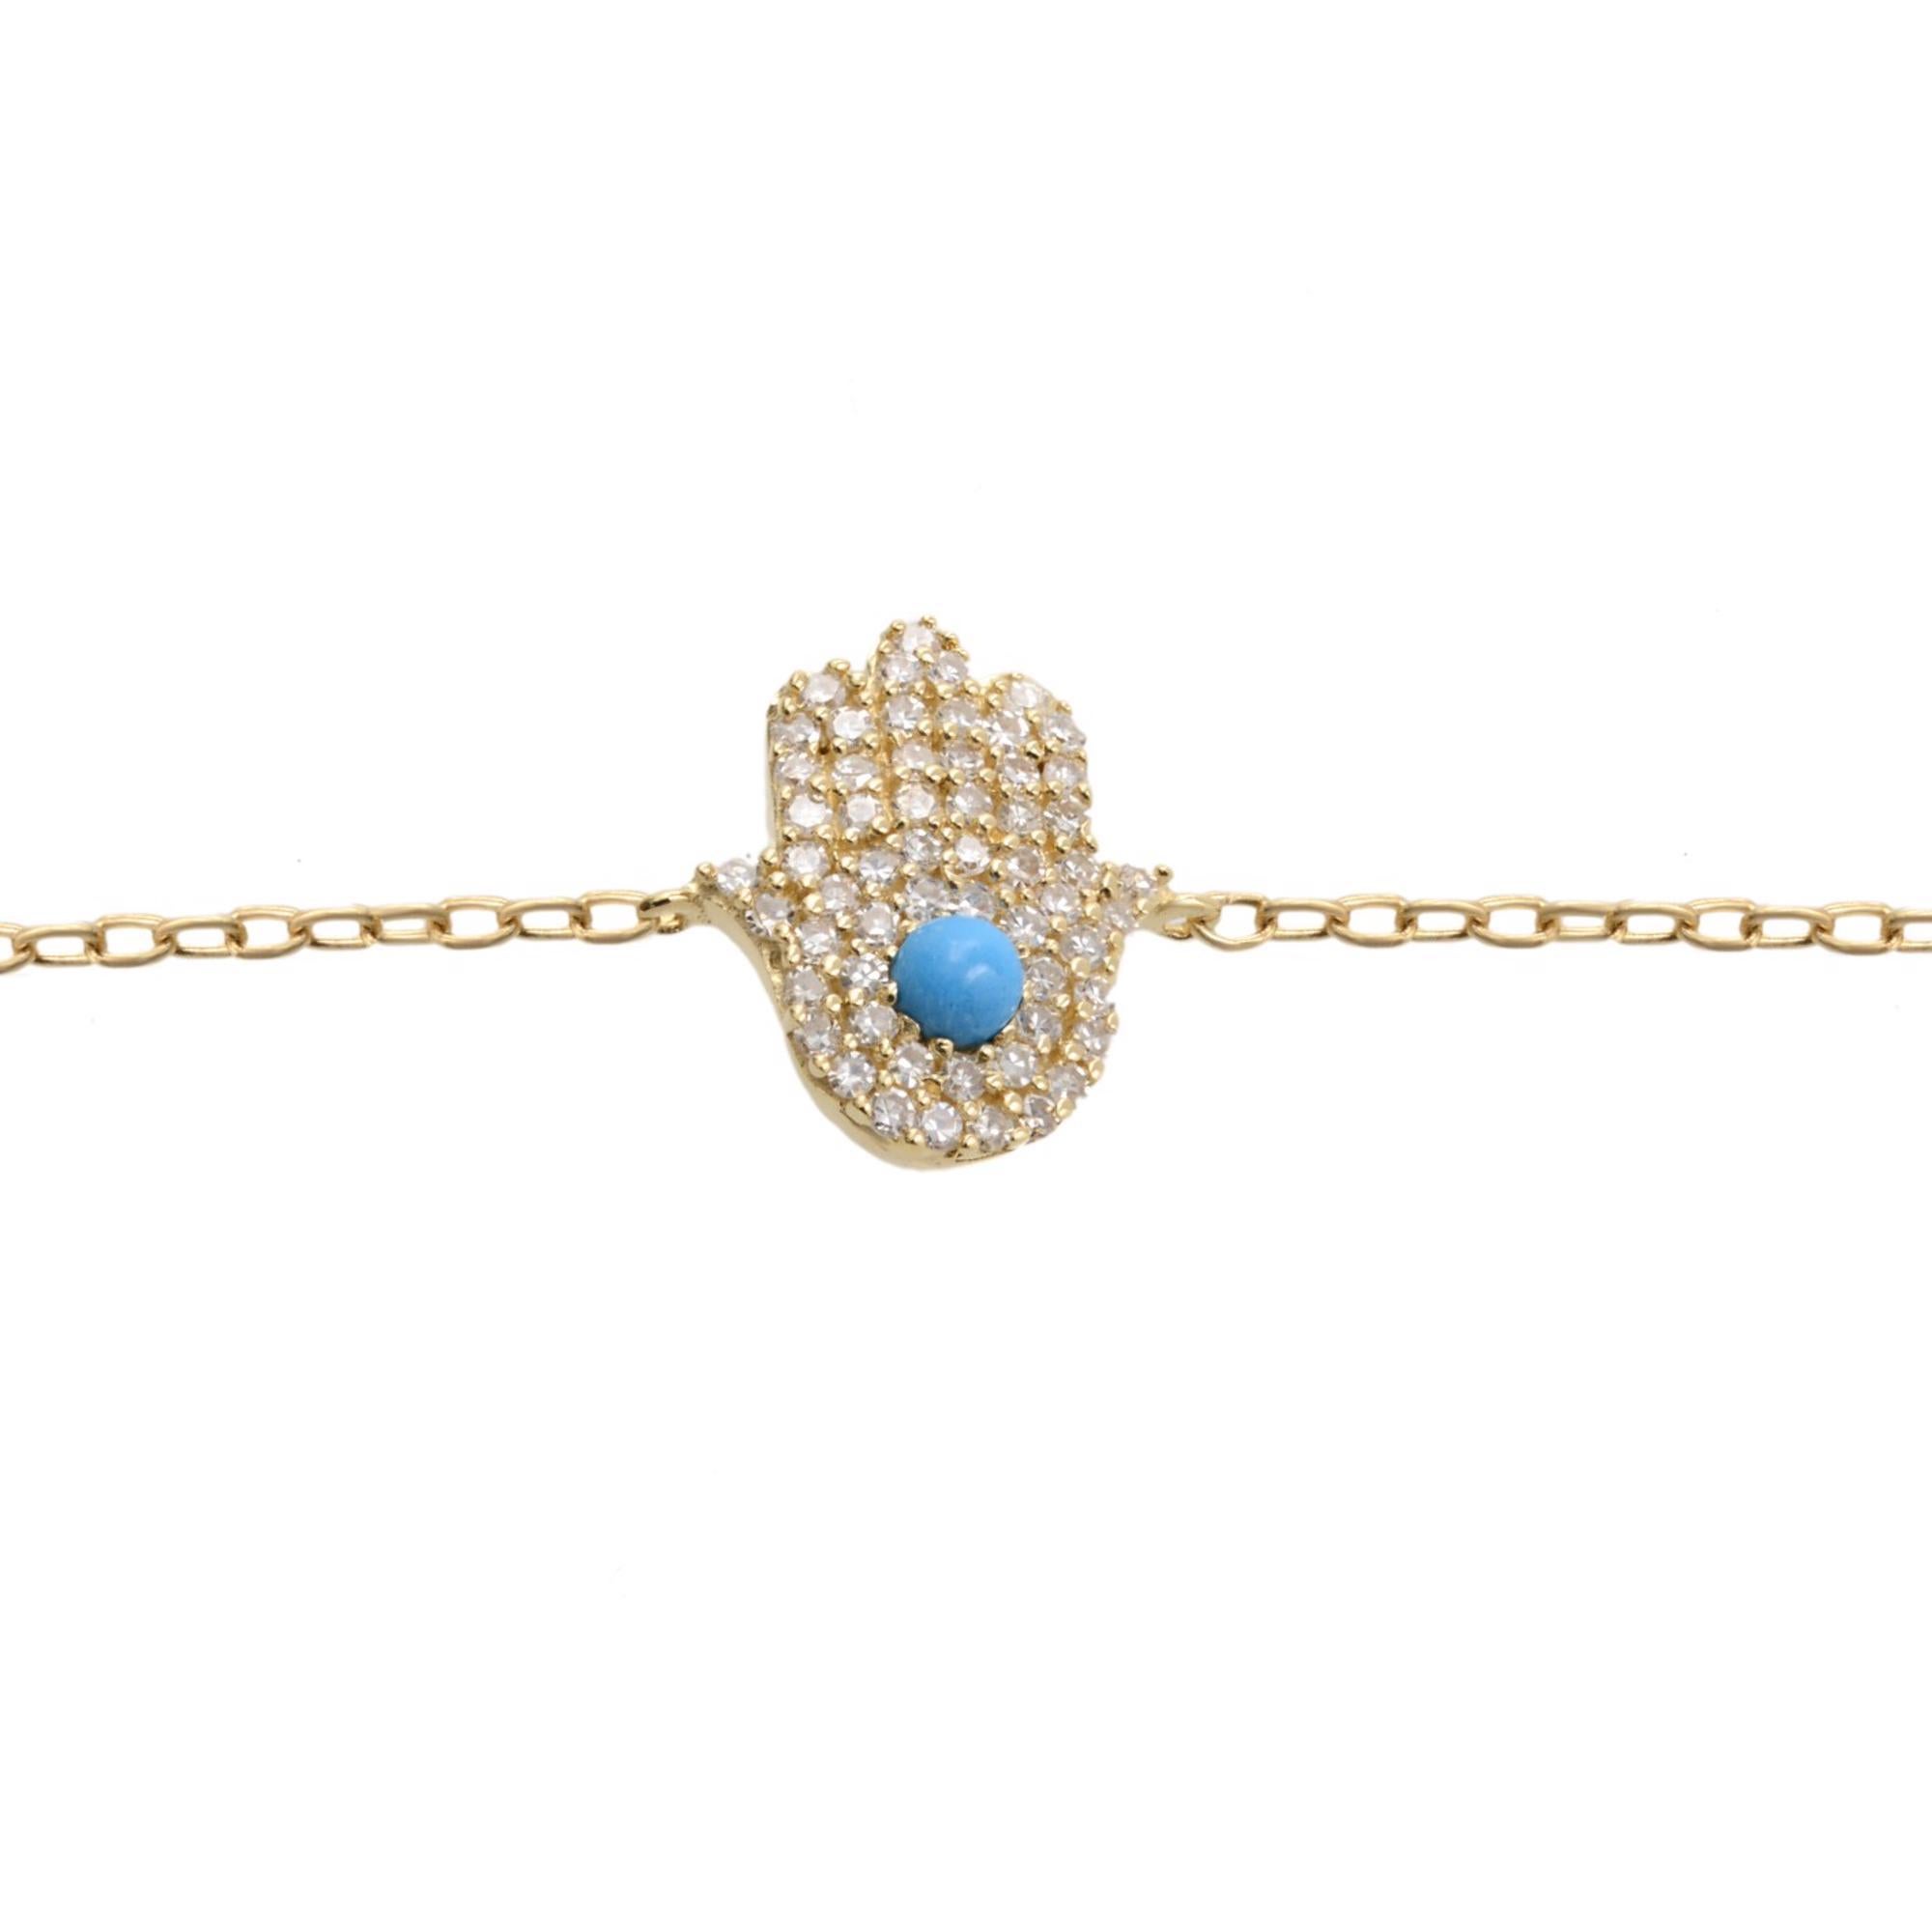 Classic and timeless hamsa bracelet, crafted in 14k yellow gold comes with center stone turquoise surrounded by round cut pave set white diamonds weighing 0.15cttw, anchored with delicate 7.5 inches 14k yellow gold chain. This bracelet is available